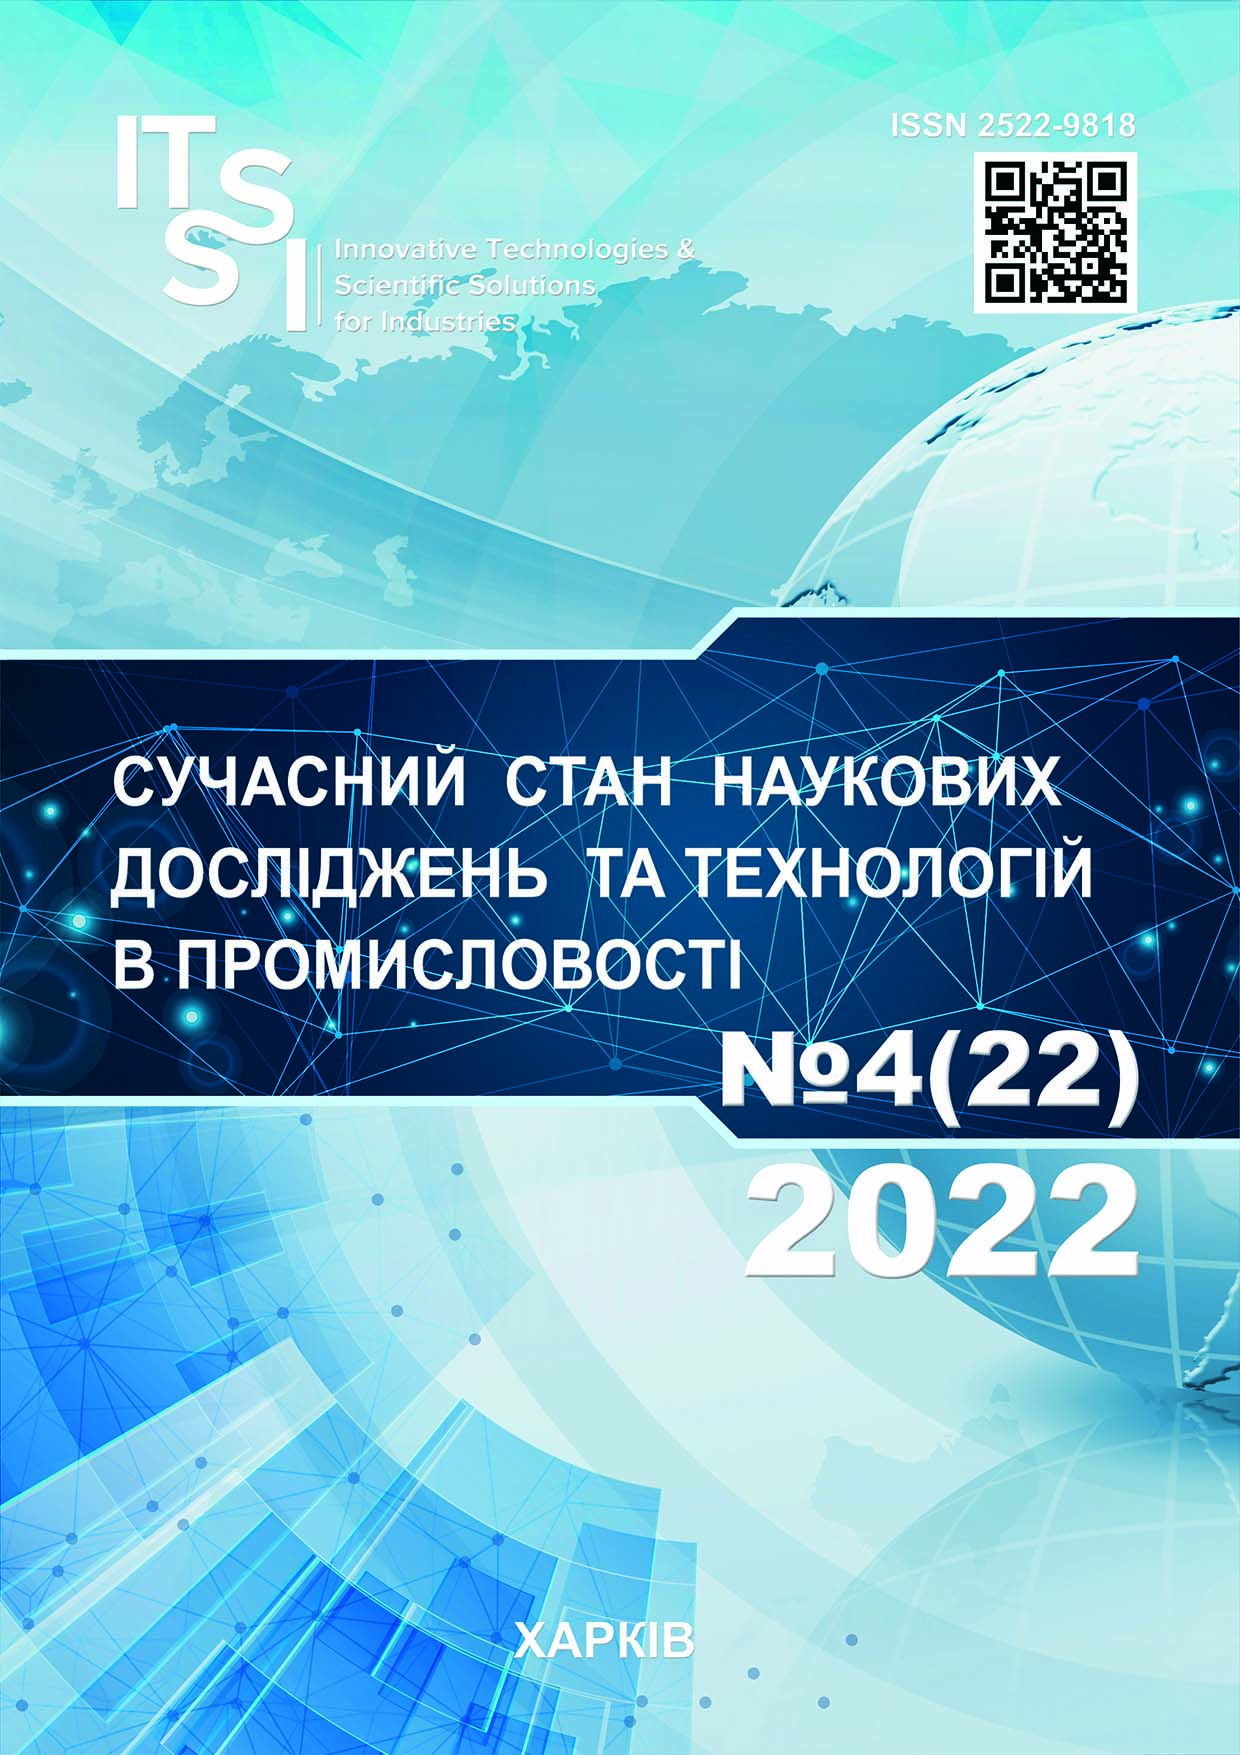 					View No. 4 (22) (2022): INNOVATIVE  TECHNOLOGIES  AND  SCIENTIFIC SOLUTIONS FOR INDUSTRIES
				